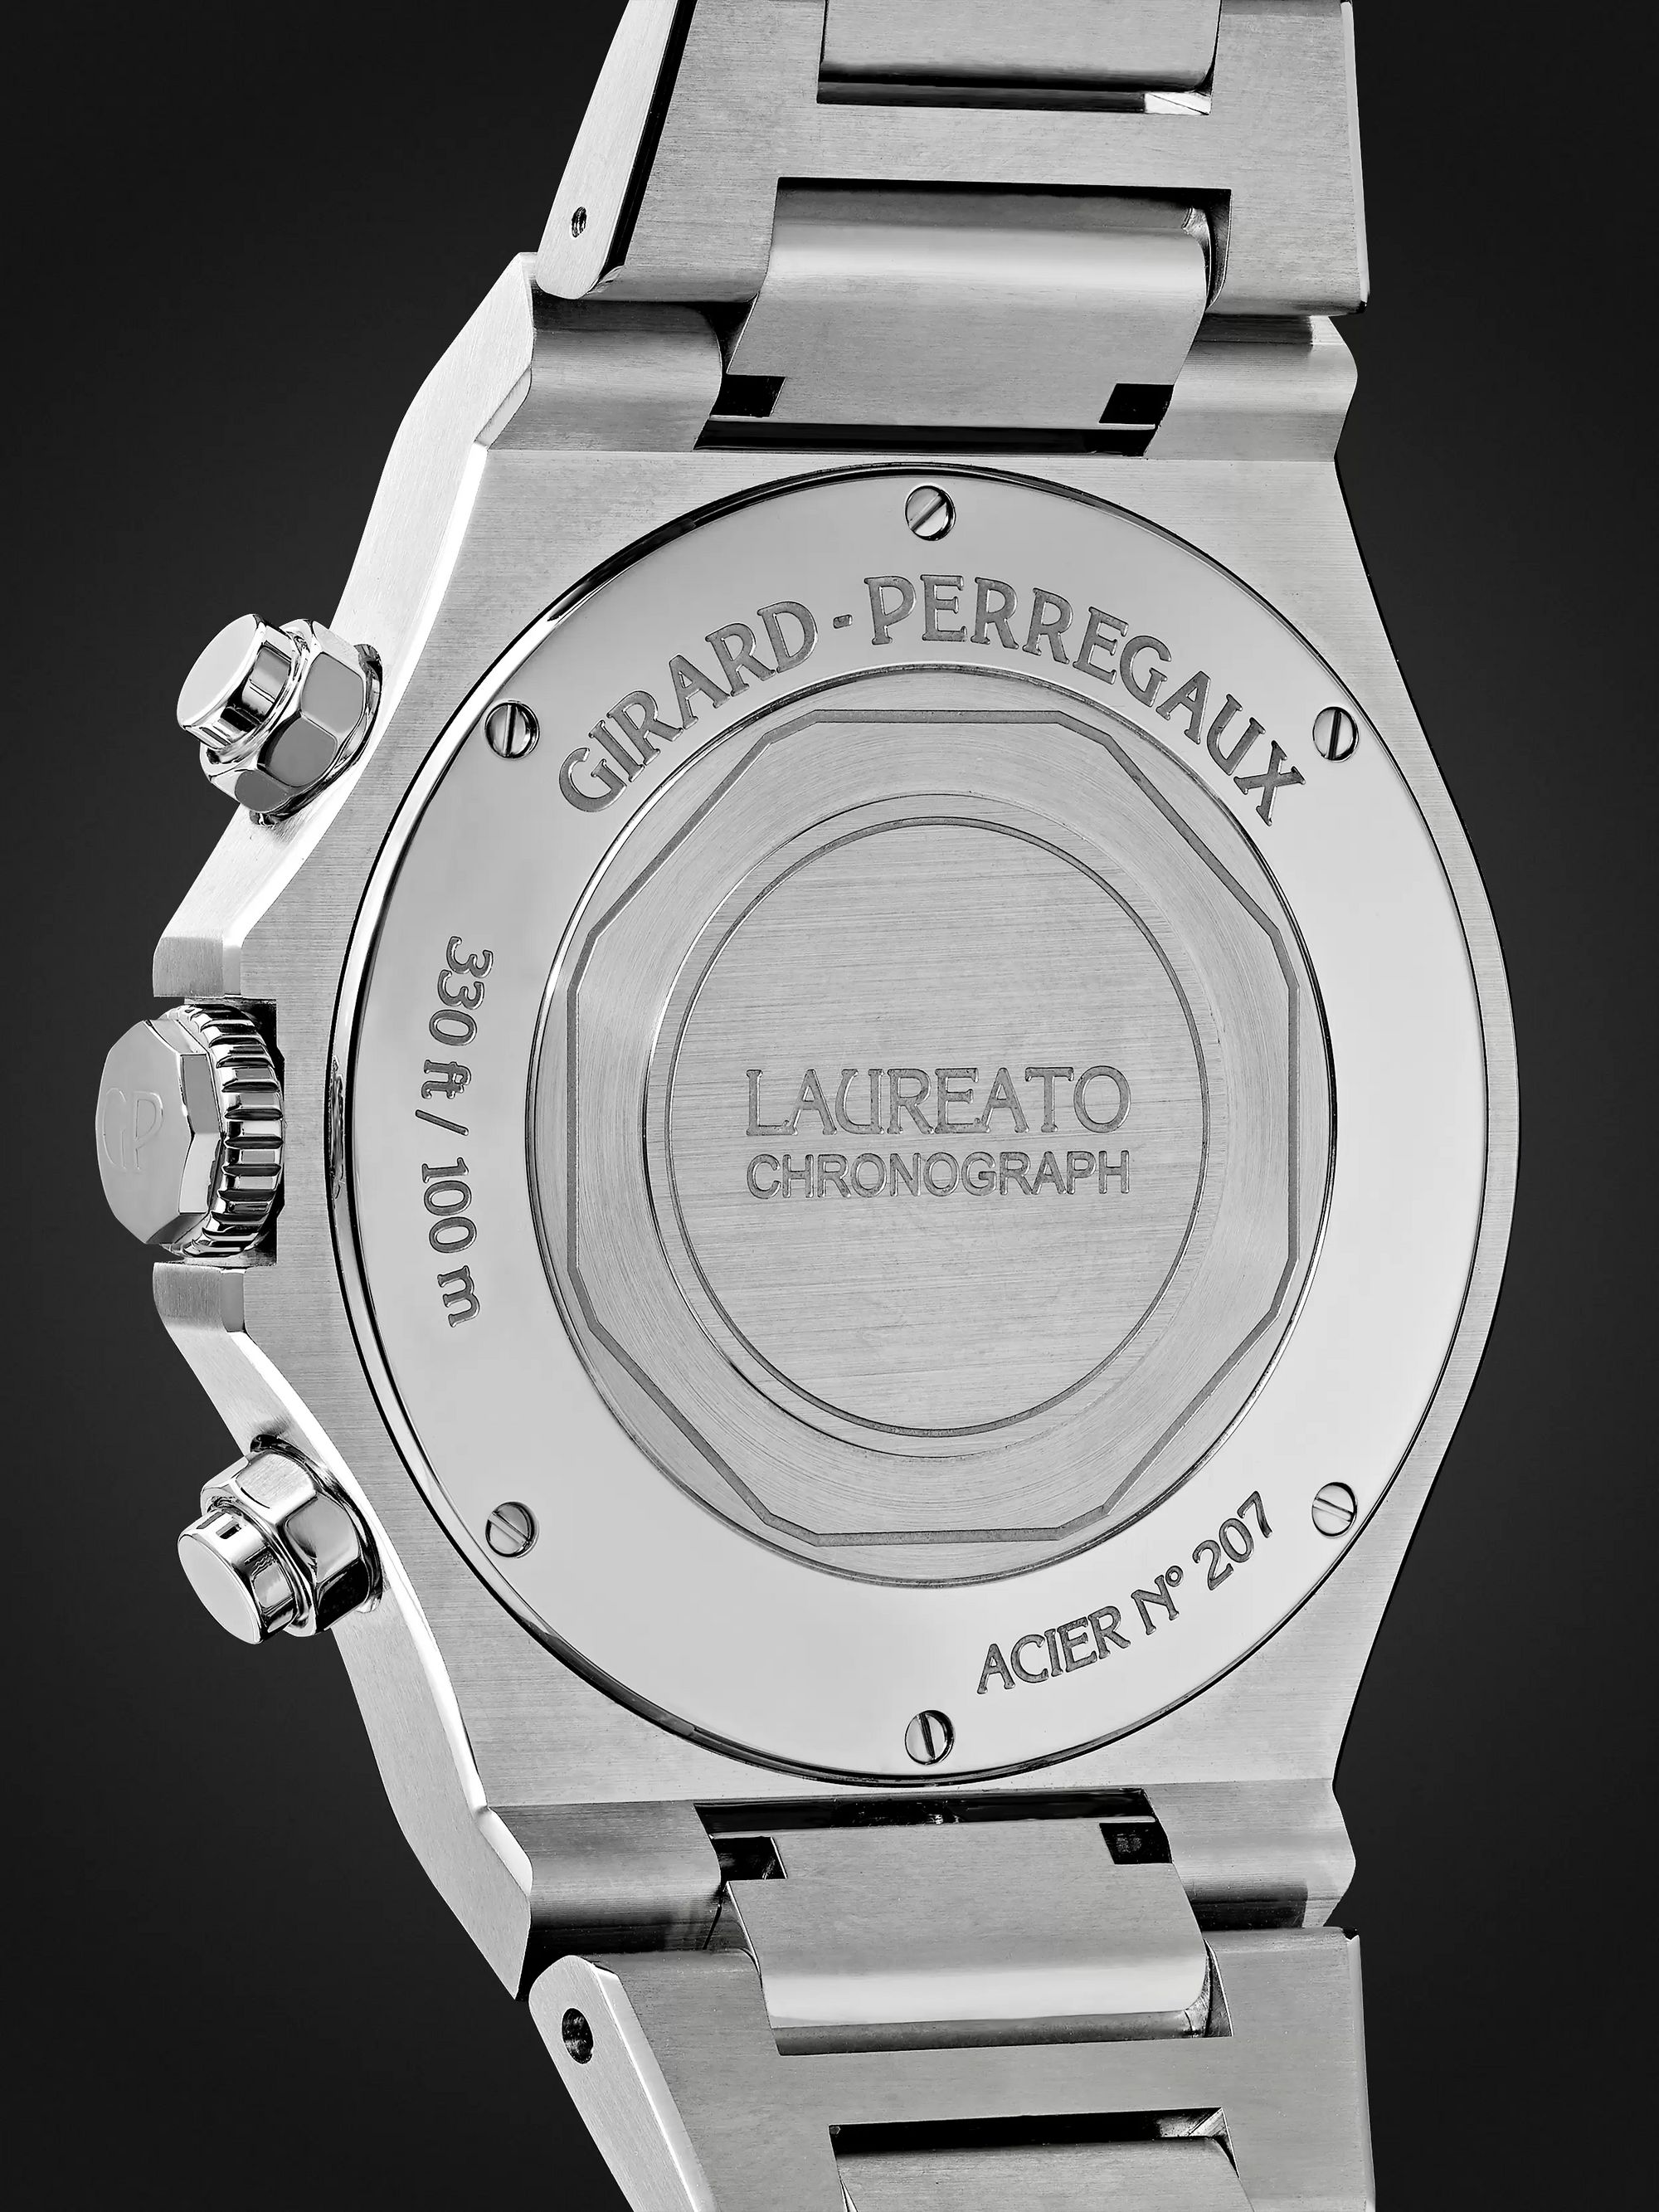 GIRARD-PERREGAUX Laureato Chronograph Automatic 42mm Stainless Steel Watch, Ref. No. 81020-11-431-11A